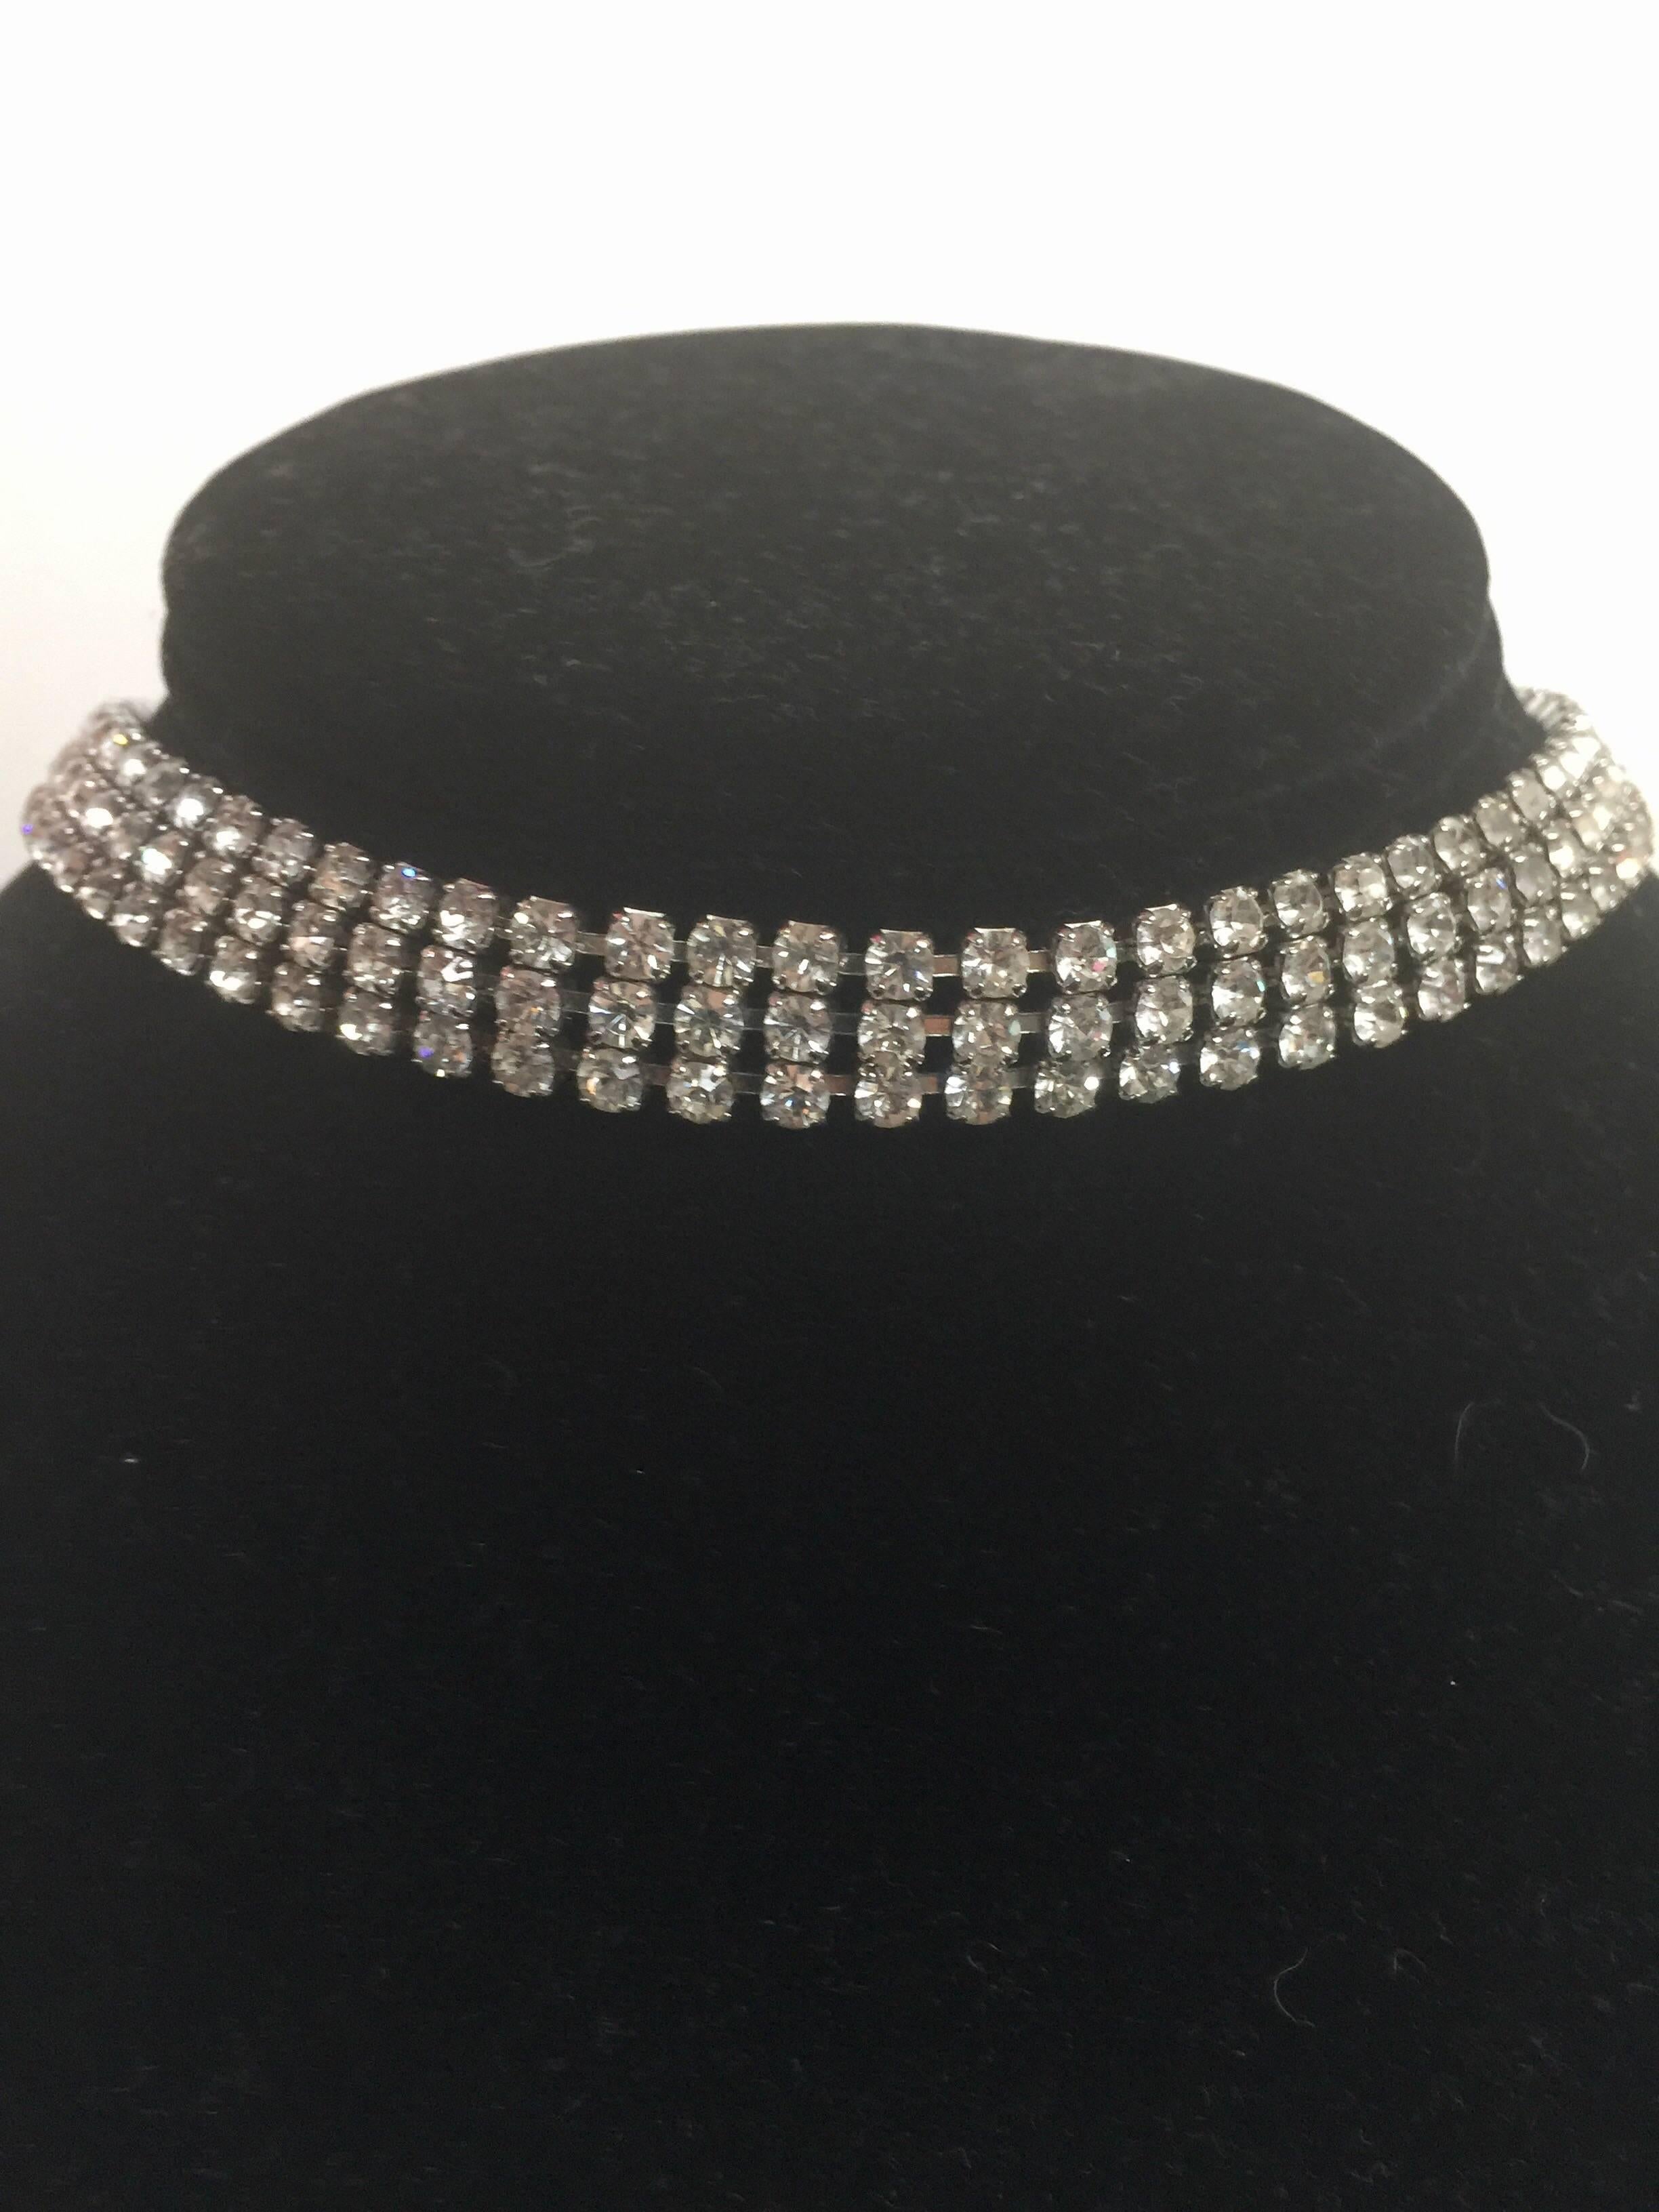 This simple yet elegant crystal diamanté choker is unsigned but in beautiful condition.  It is adjustable in size from 13"-15"